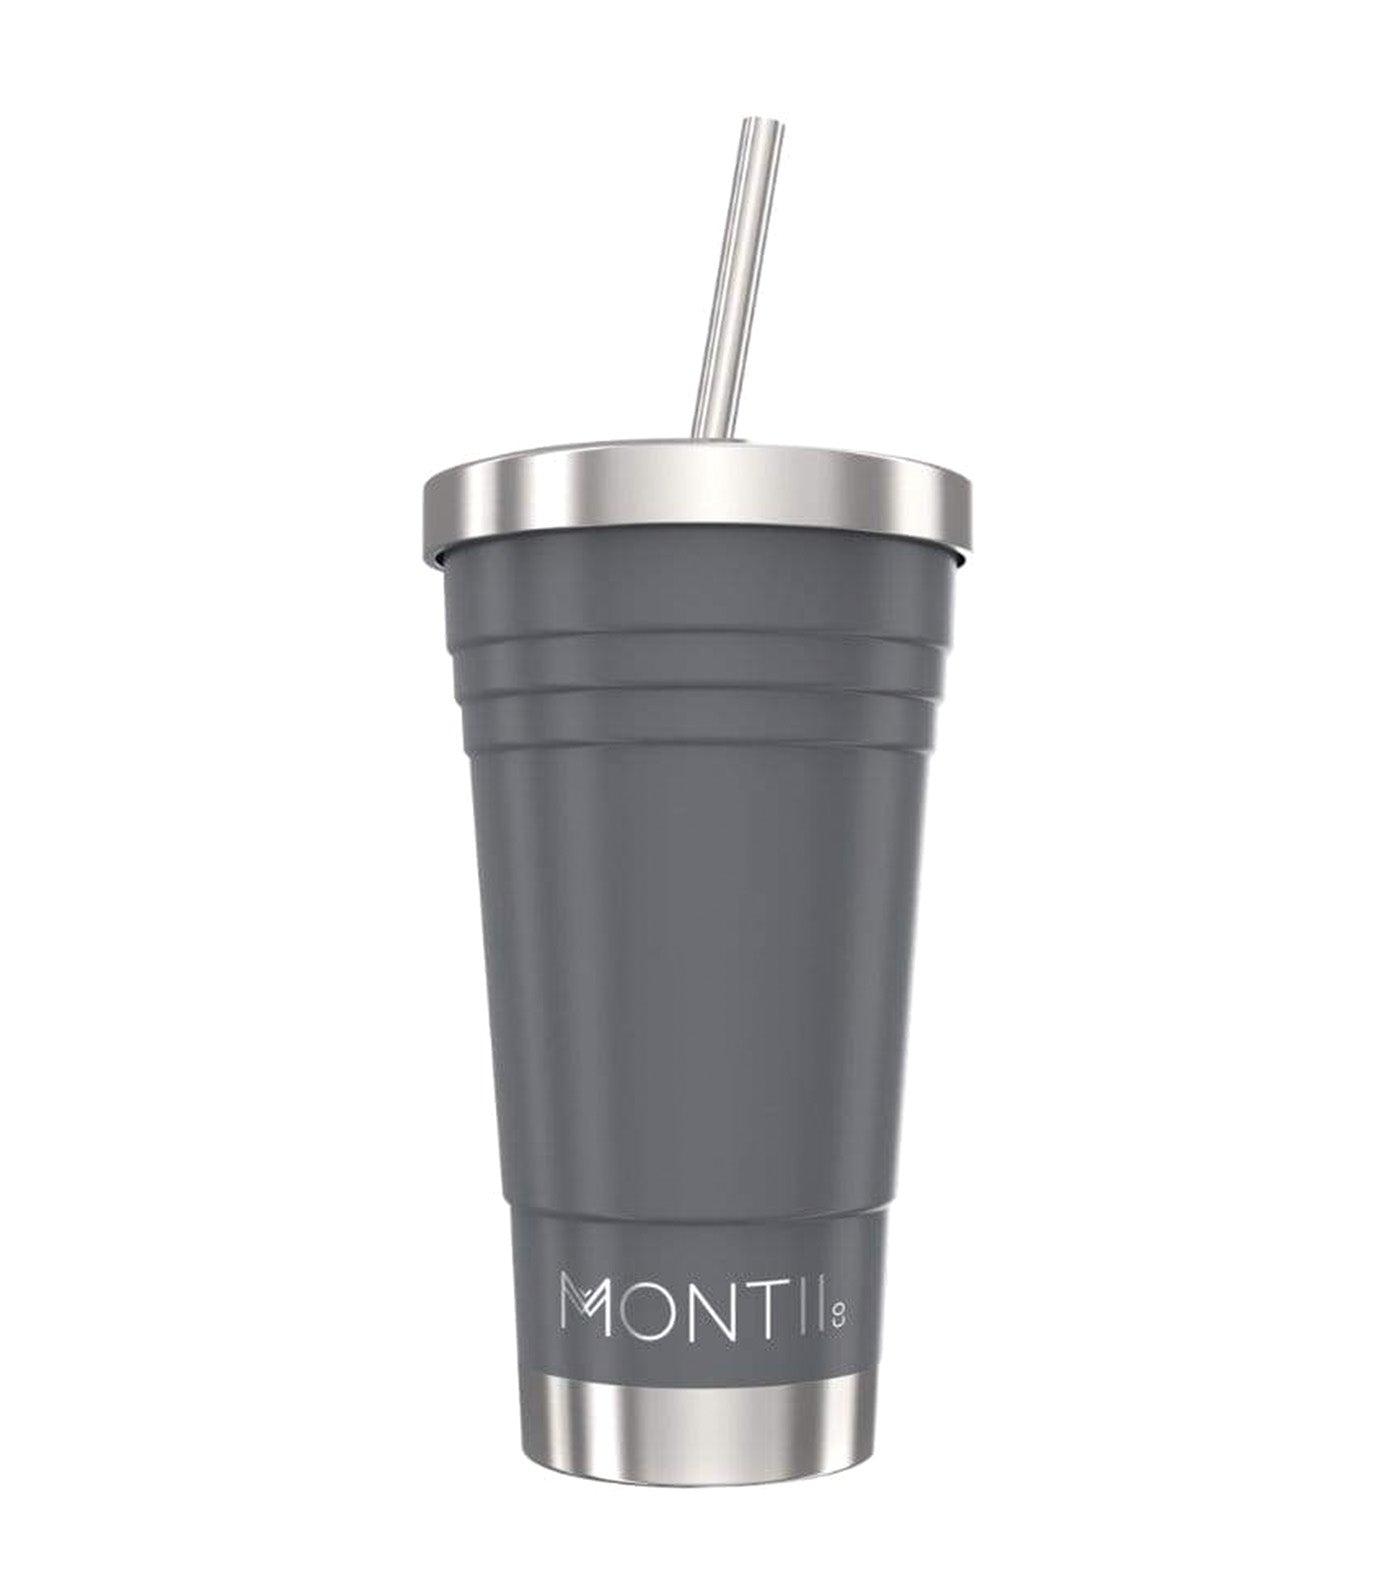 Smoothie Cup, Stainless Steel, 450ml